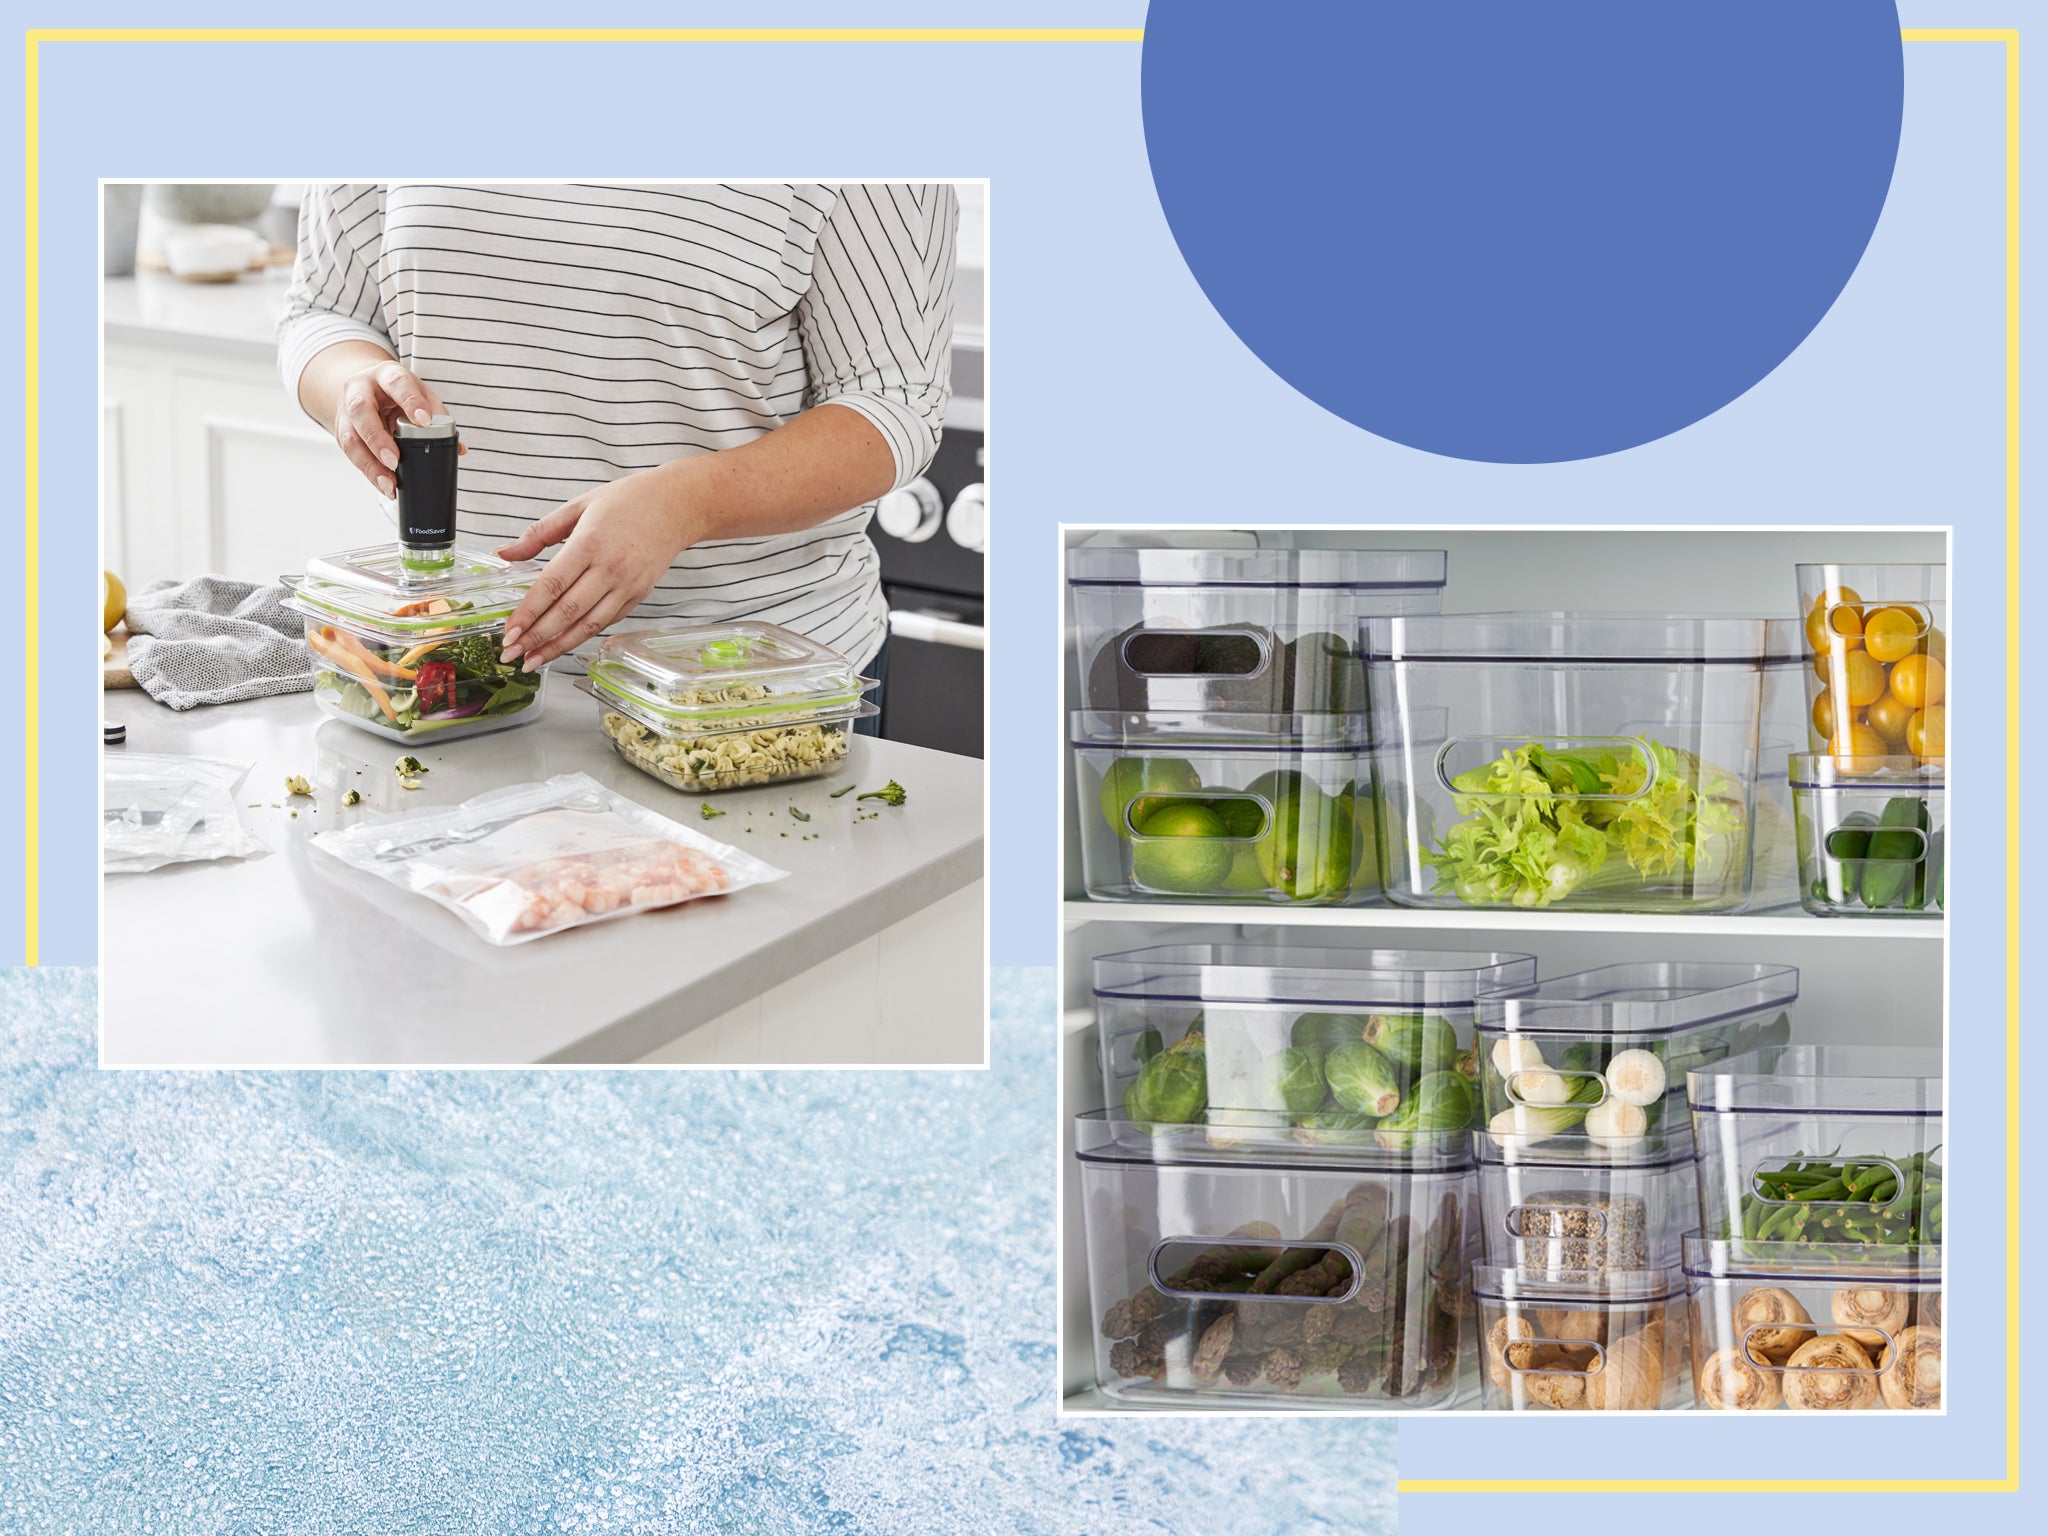 with Handle Refrigerator Eggs Container Egg Holder Storage Clear for Fridge Vent Holes Storage Box for Eggs Pantry Organization Holds up to 12 Eggs Portable Stackable Kitchen 